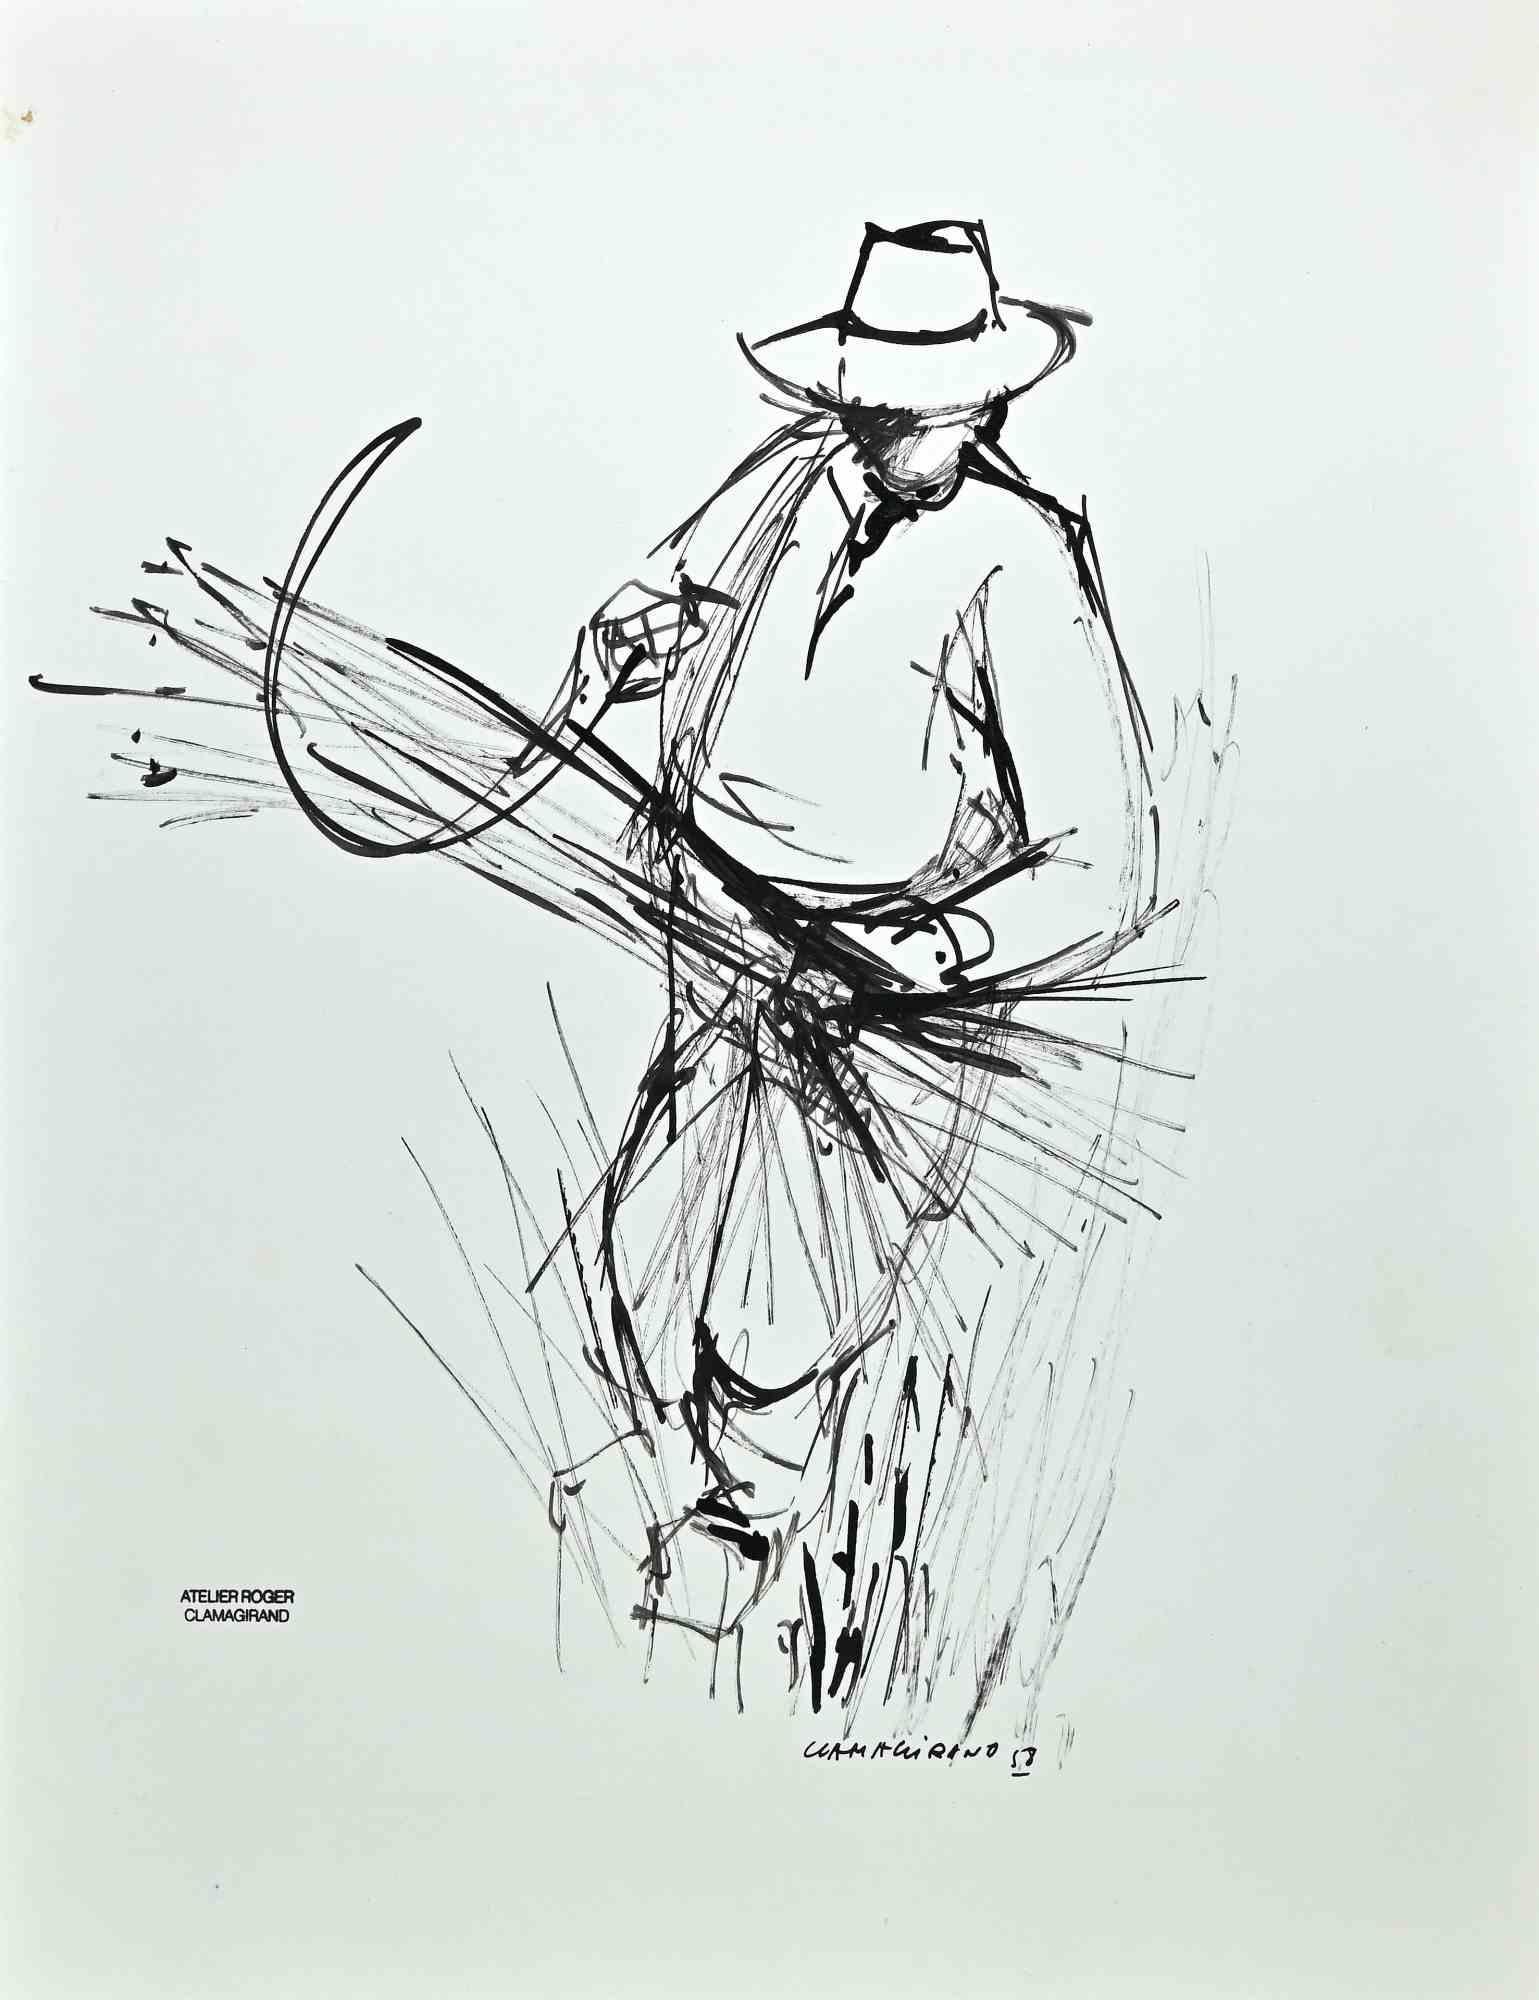 Peasant is an original Drawing on paper in 1958 realized by Roger Clamagirand.

Hand-signed and stamped on the lower and dated.

Black Marker Pen on paper.

Good conditions.

The artwork through soft strokes by mastery.